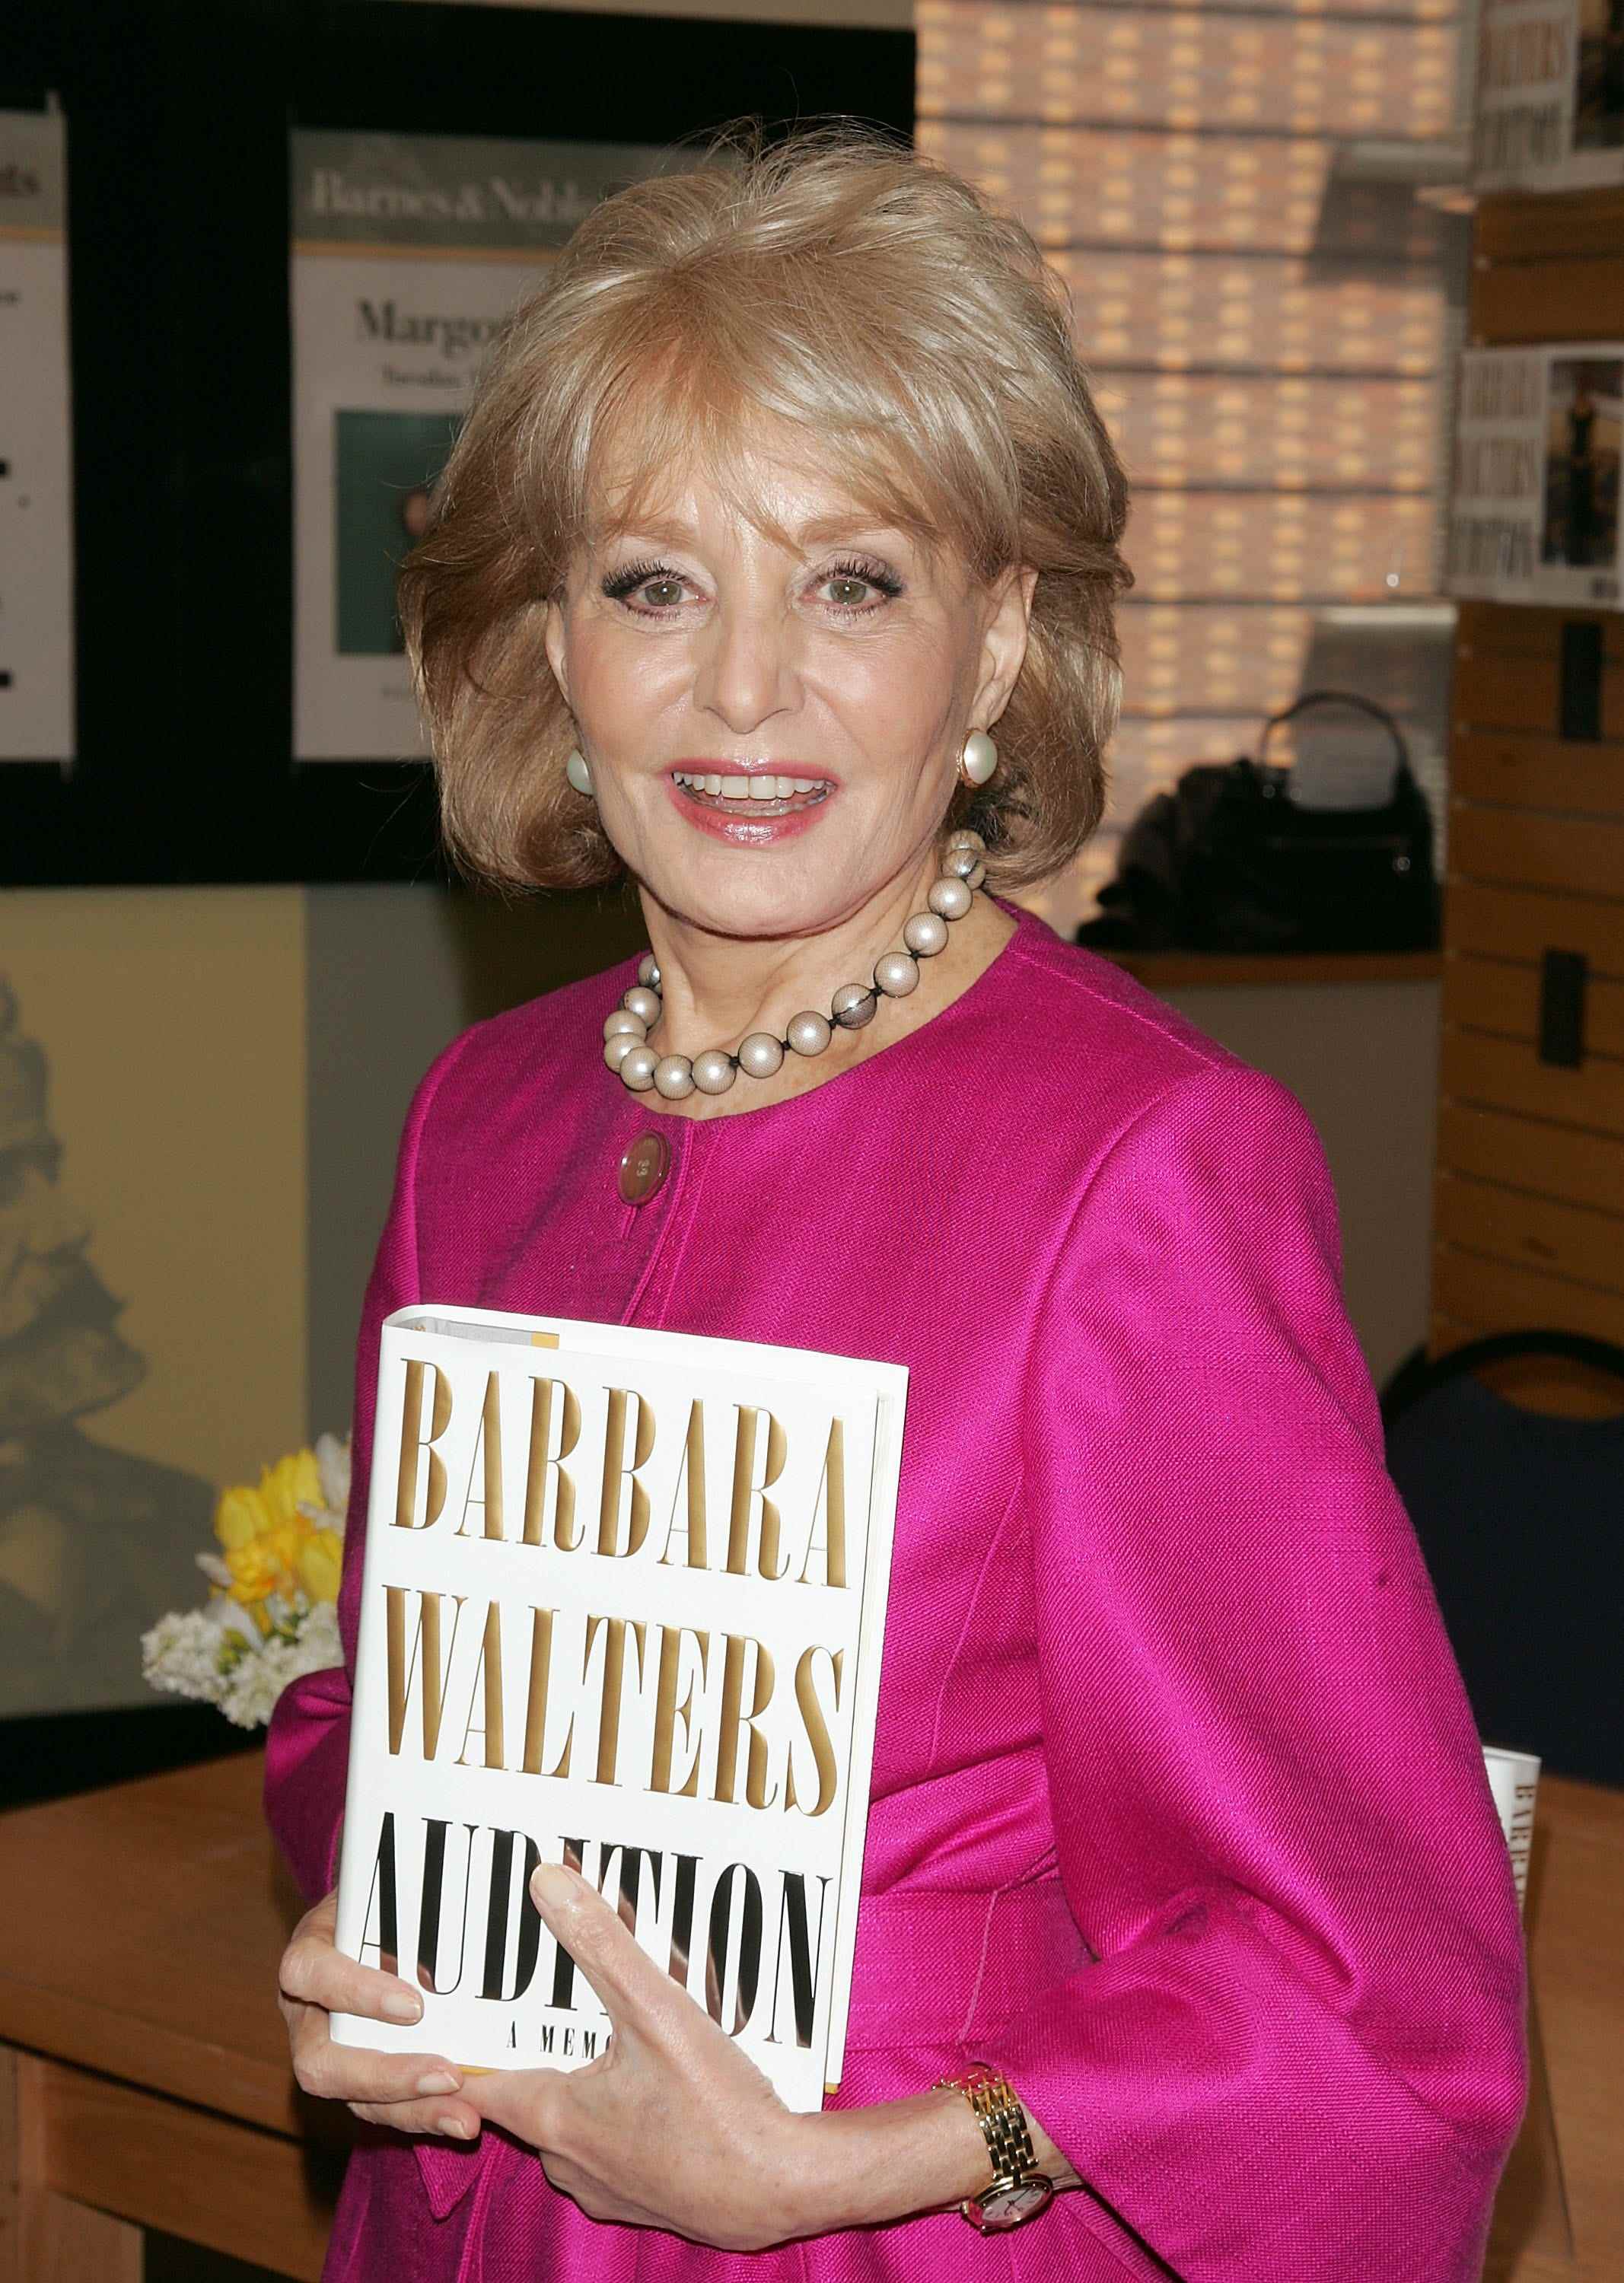 Barbara Walters signiert Exemplare ihres Buches „Audition: A Memoir“ bei Barnes & Noble, Lincoln Square am 6. Mai 2008 in New York City